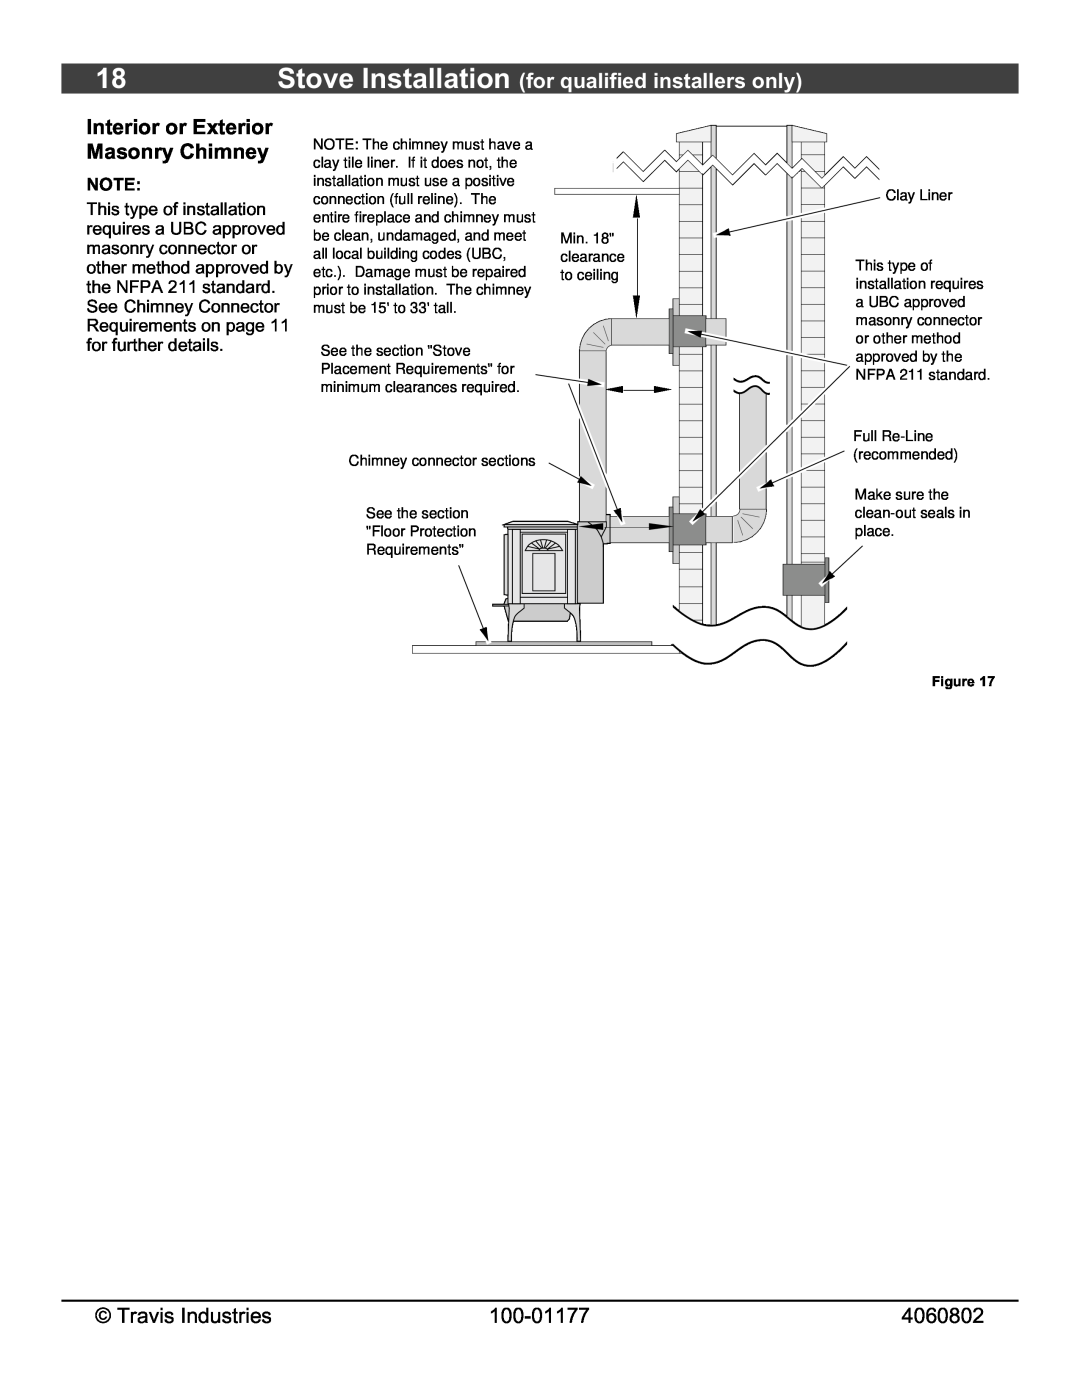 Lopi 028-S-75-2 owner manual Stove Installation for qualified installers only, Interior or Exterior Masonry Chimney 